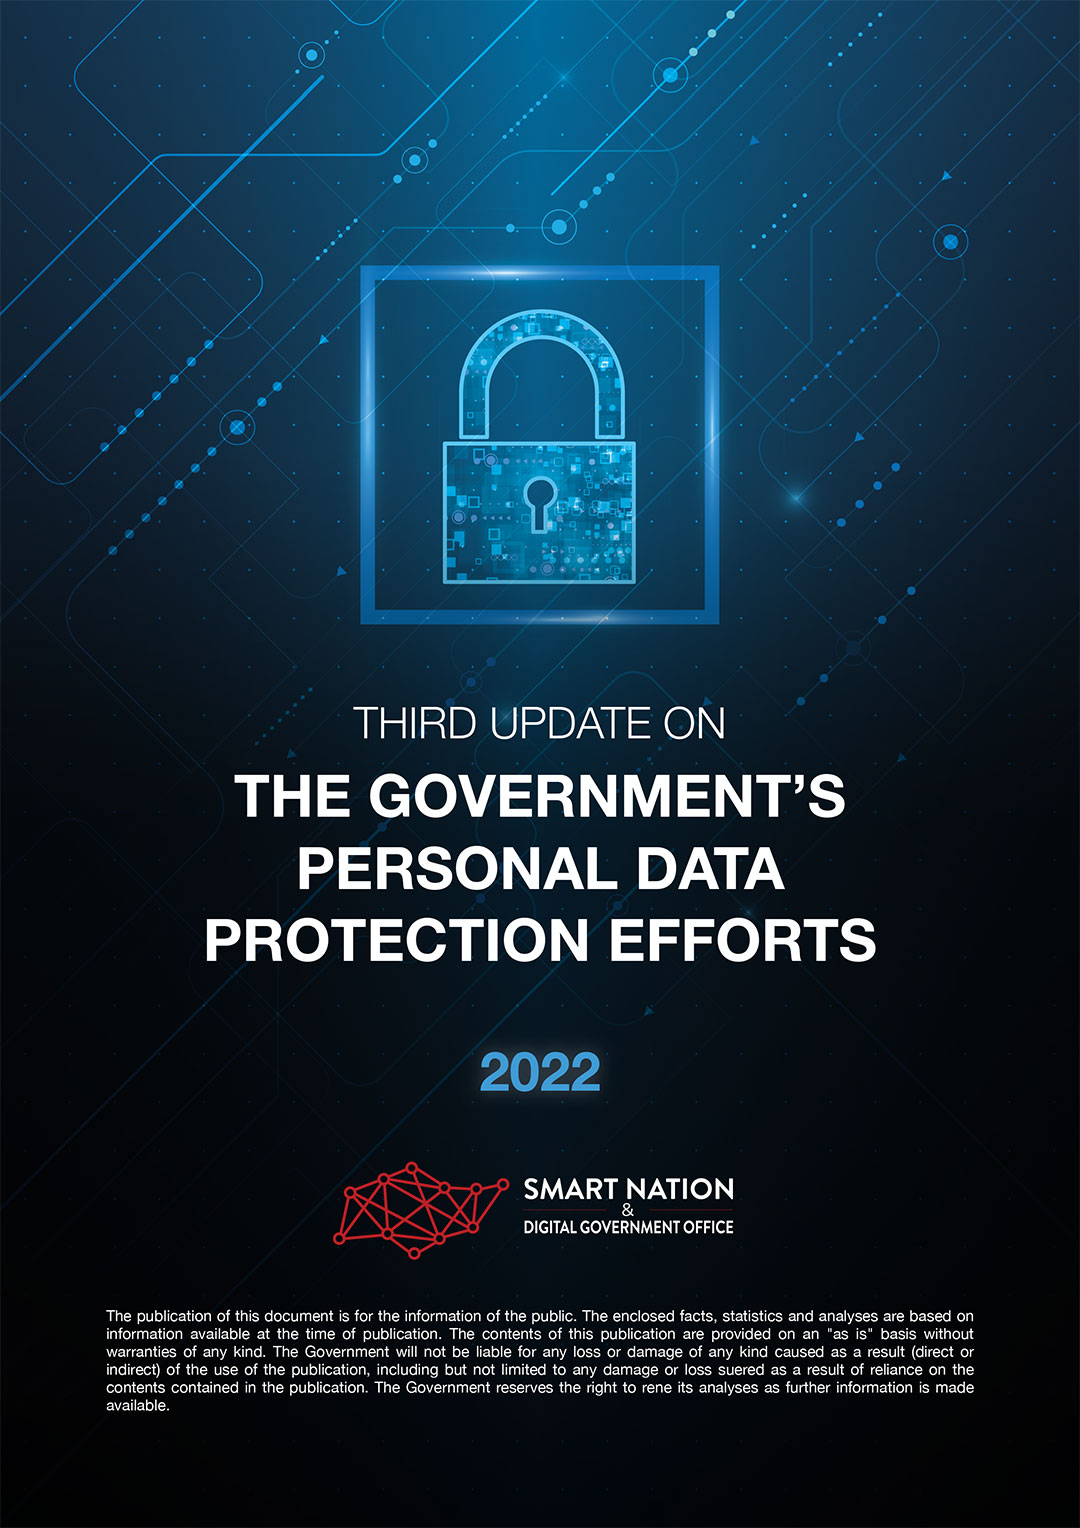 Second Update on the Government's Personal Data Protection Efforts - Summary (2021)